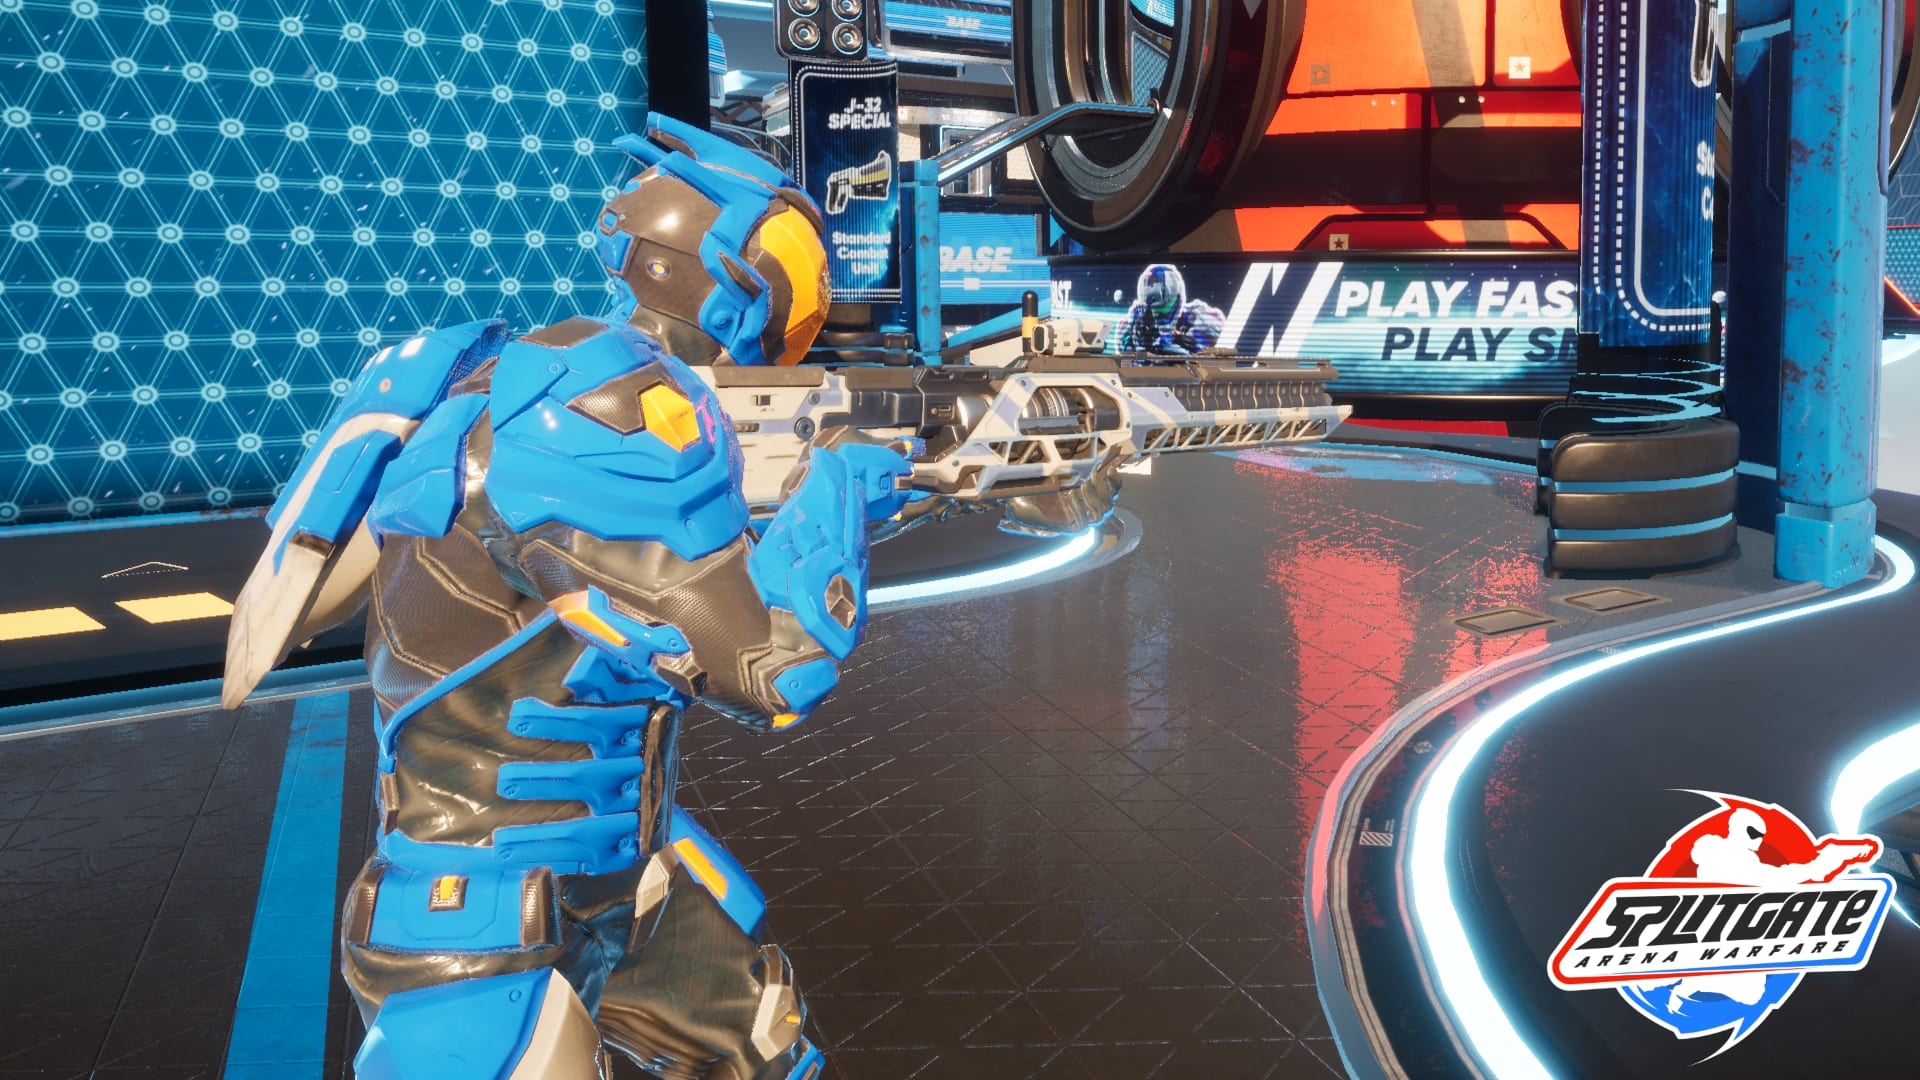 PAX East: Hands On With Splitgate: Arena Warfare